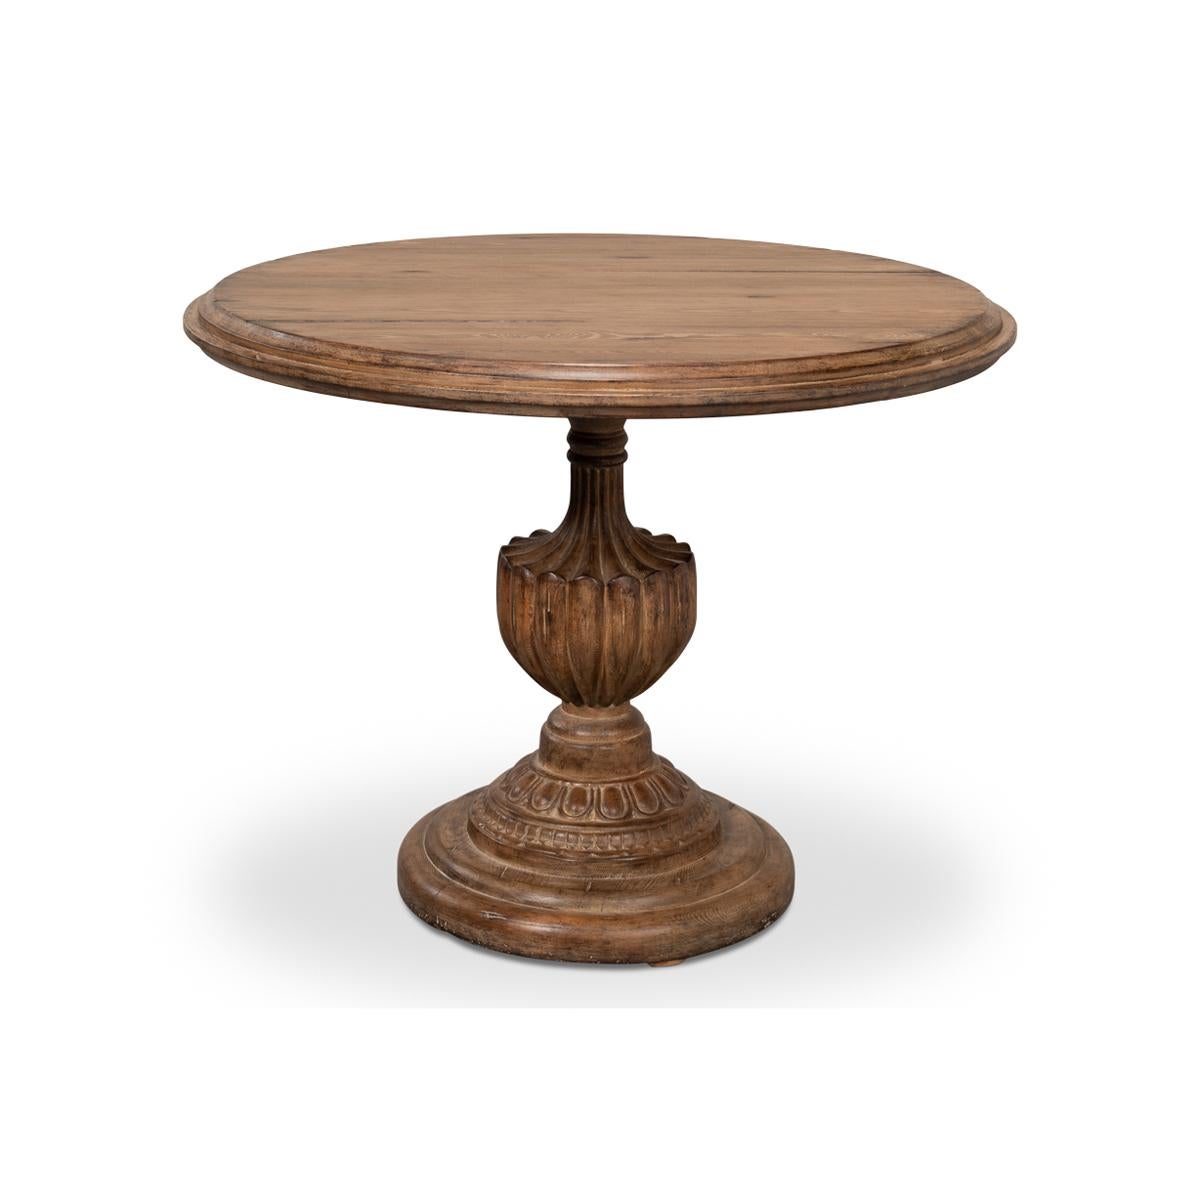 NeoClassic Bistro table, a piece that seamlessly blends timeless design with modern functionality. Handcrafted from solid reclaimed pine, this table showcases the beauty of natural materials and will instantly elevate the look and feel of your